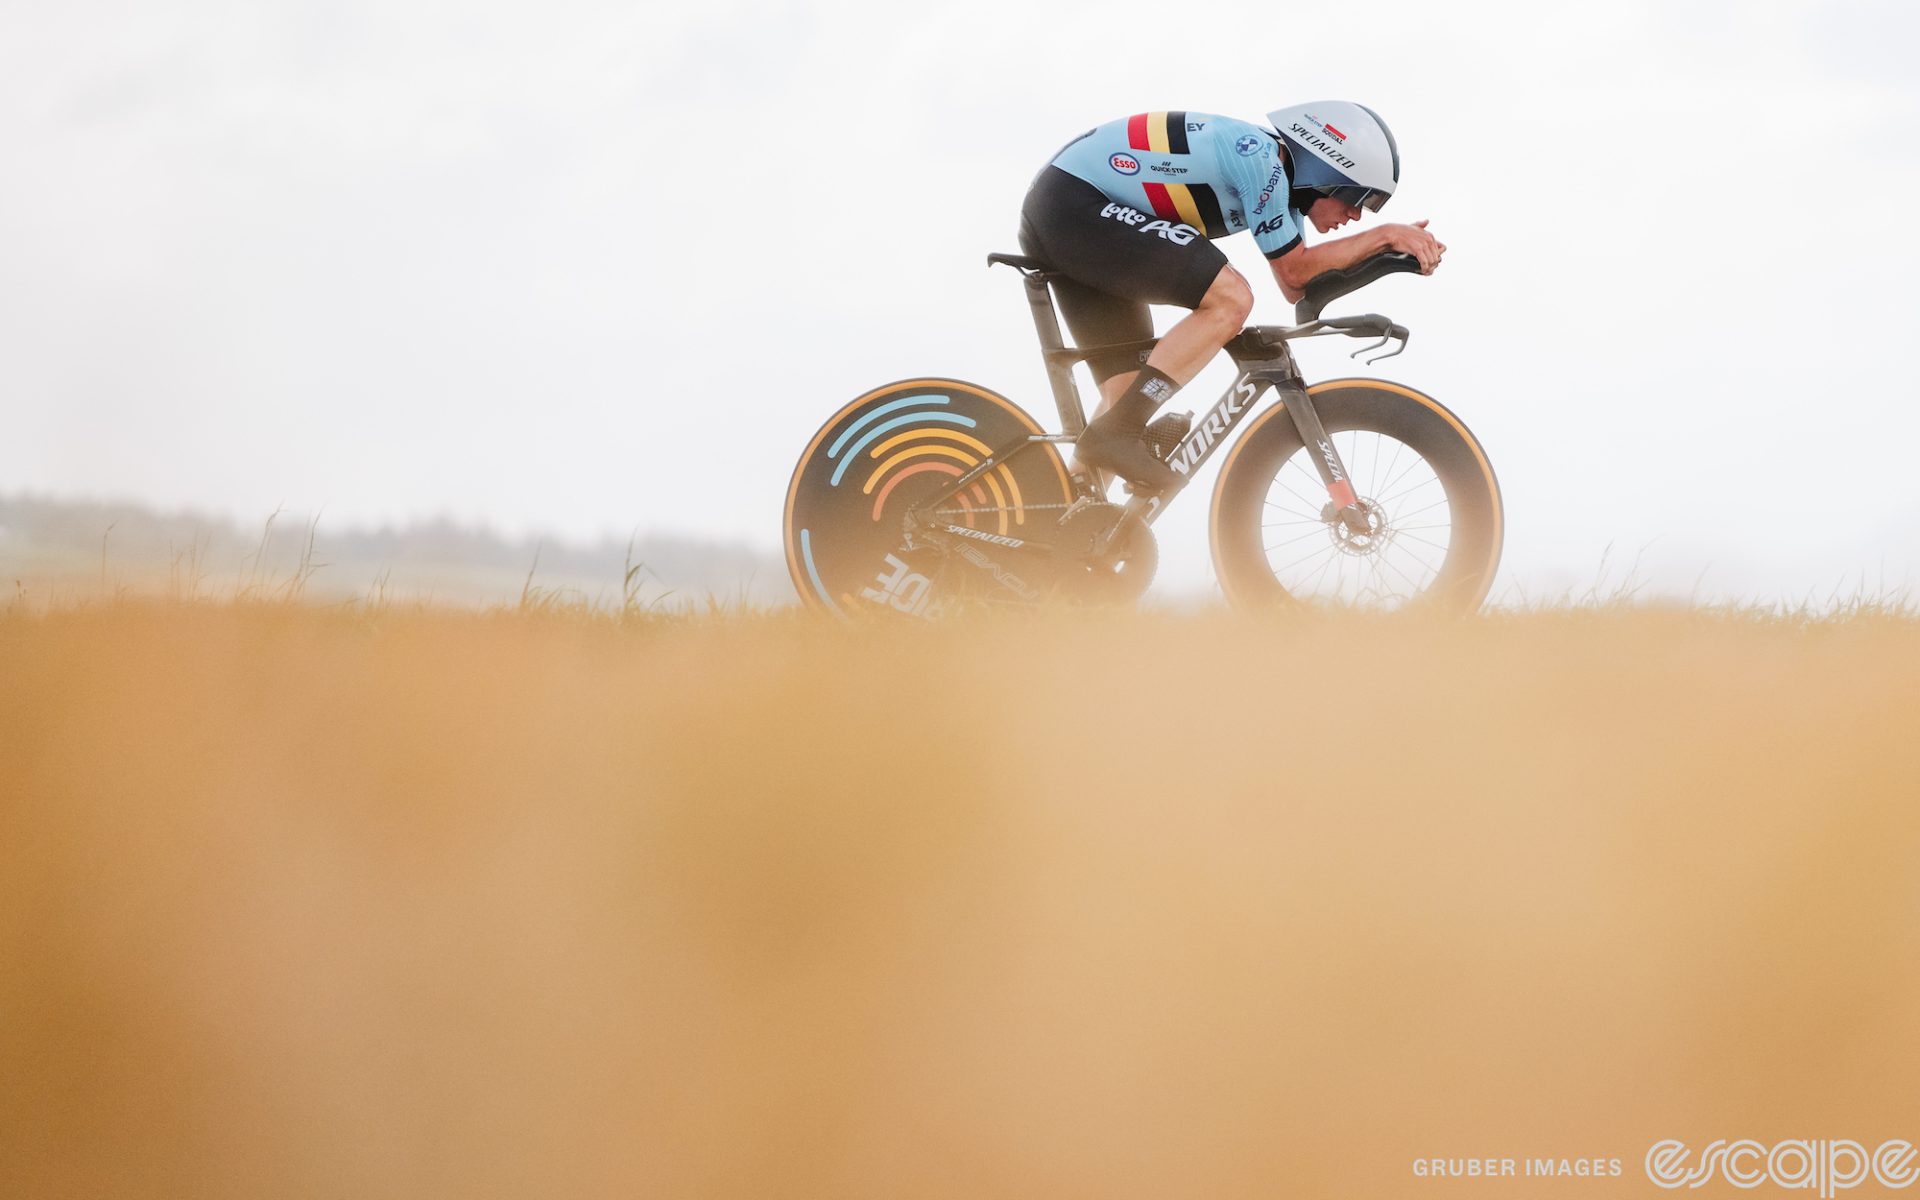 Remco Evenepoel races in the World Time Trial Championship in Glasgow, Scotland. The picture is divided in roughly two equal halves. The top is Evenepoel, in Belgian national team kit, in an efficient aero tuck on his time trial bike with a grey sky and low hill in the background. The lower half is the blurred-out beige of a field, giving a dreamy kind of feel to the image.